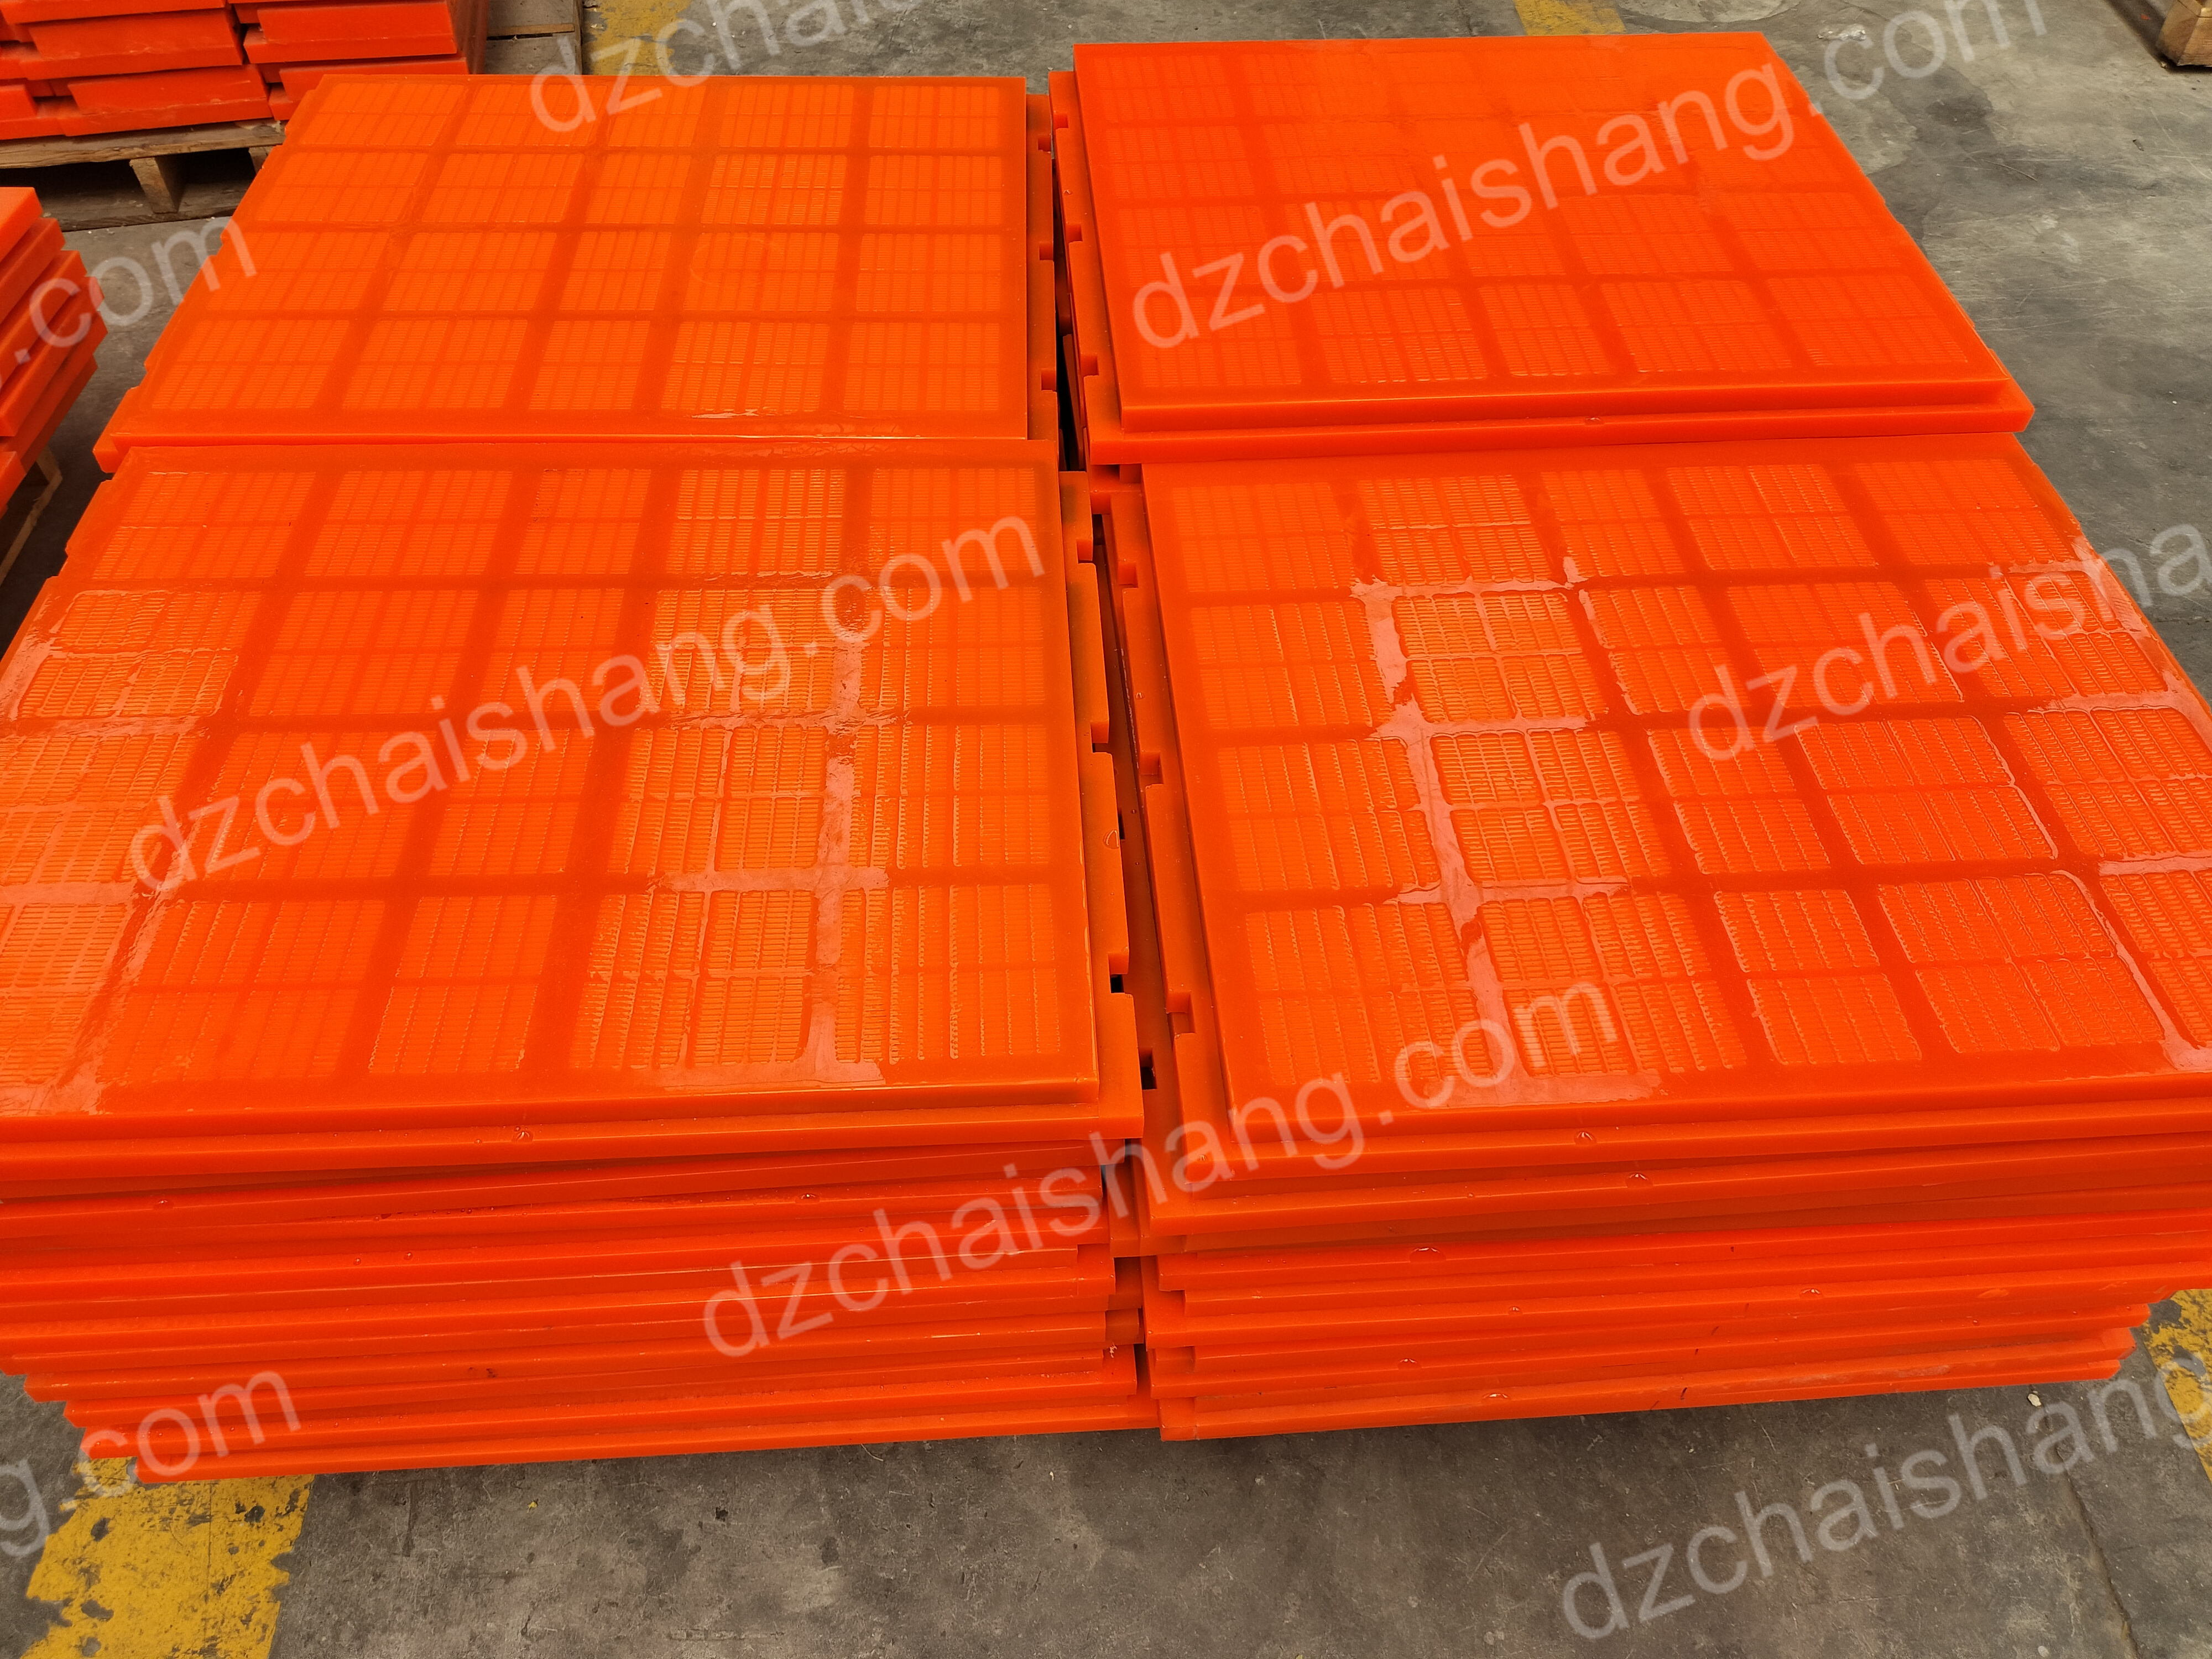 How to choose when purchasing “Polyurethane Screen”-CHAISHANG | Polyurethane Screen,Rubber Screen PanelsHigh frequency screen mesh,Belt Cleaner,Flotation Cell